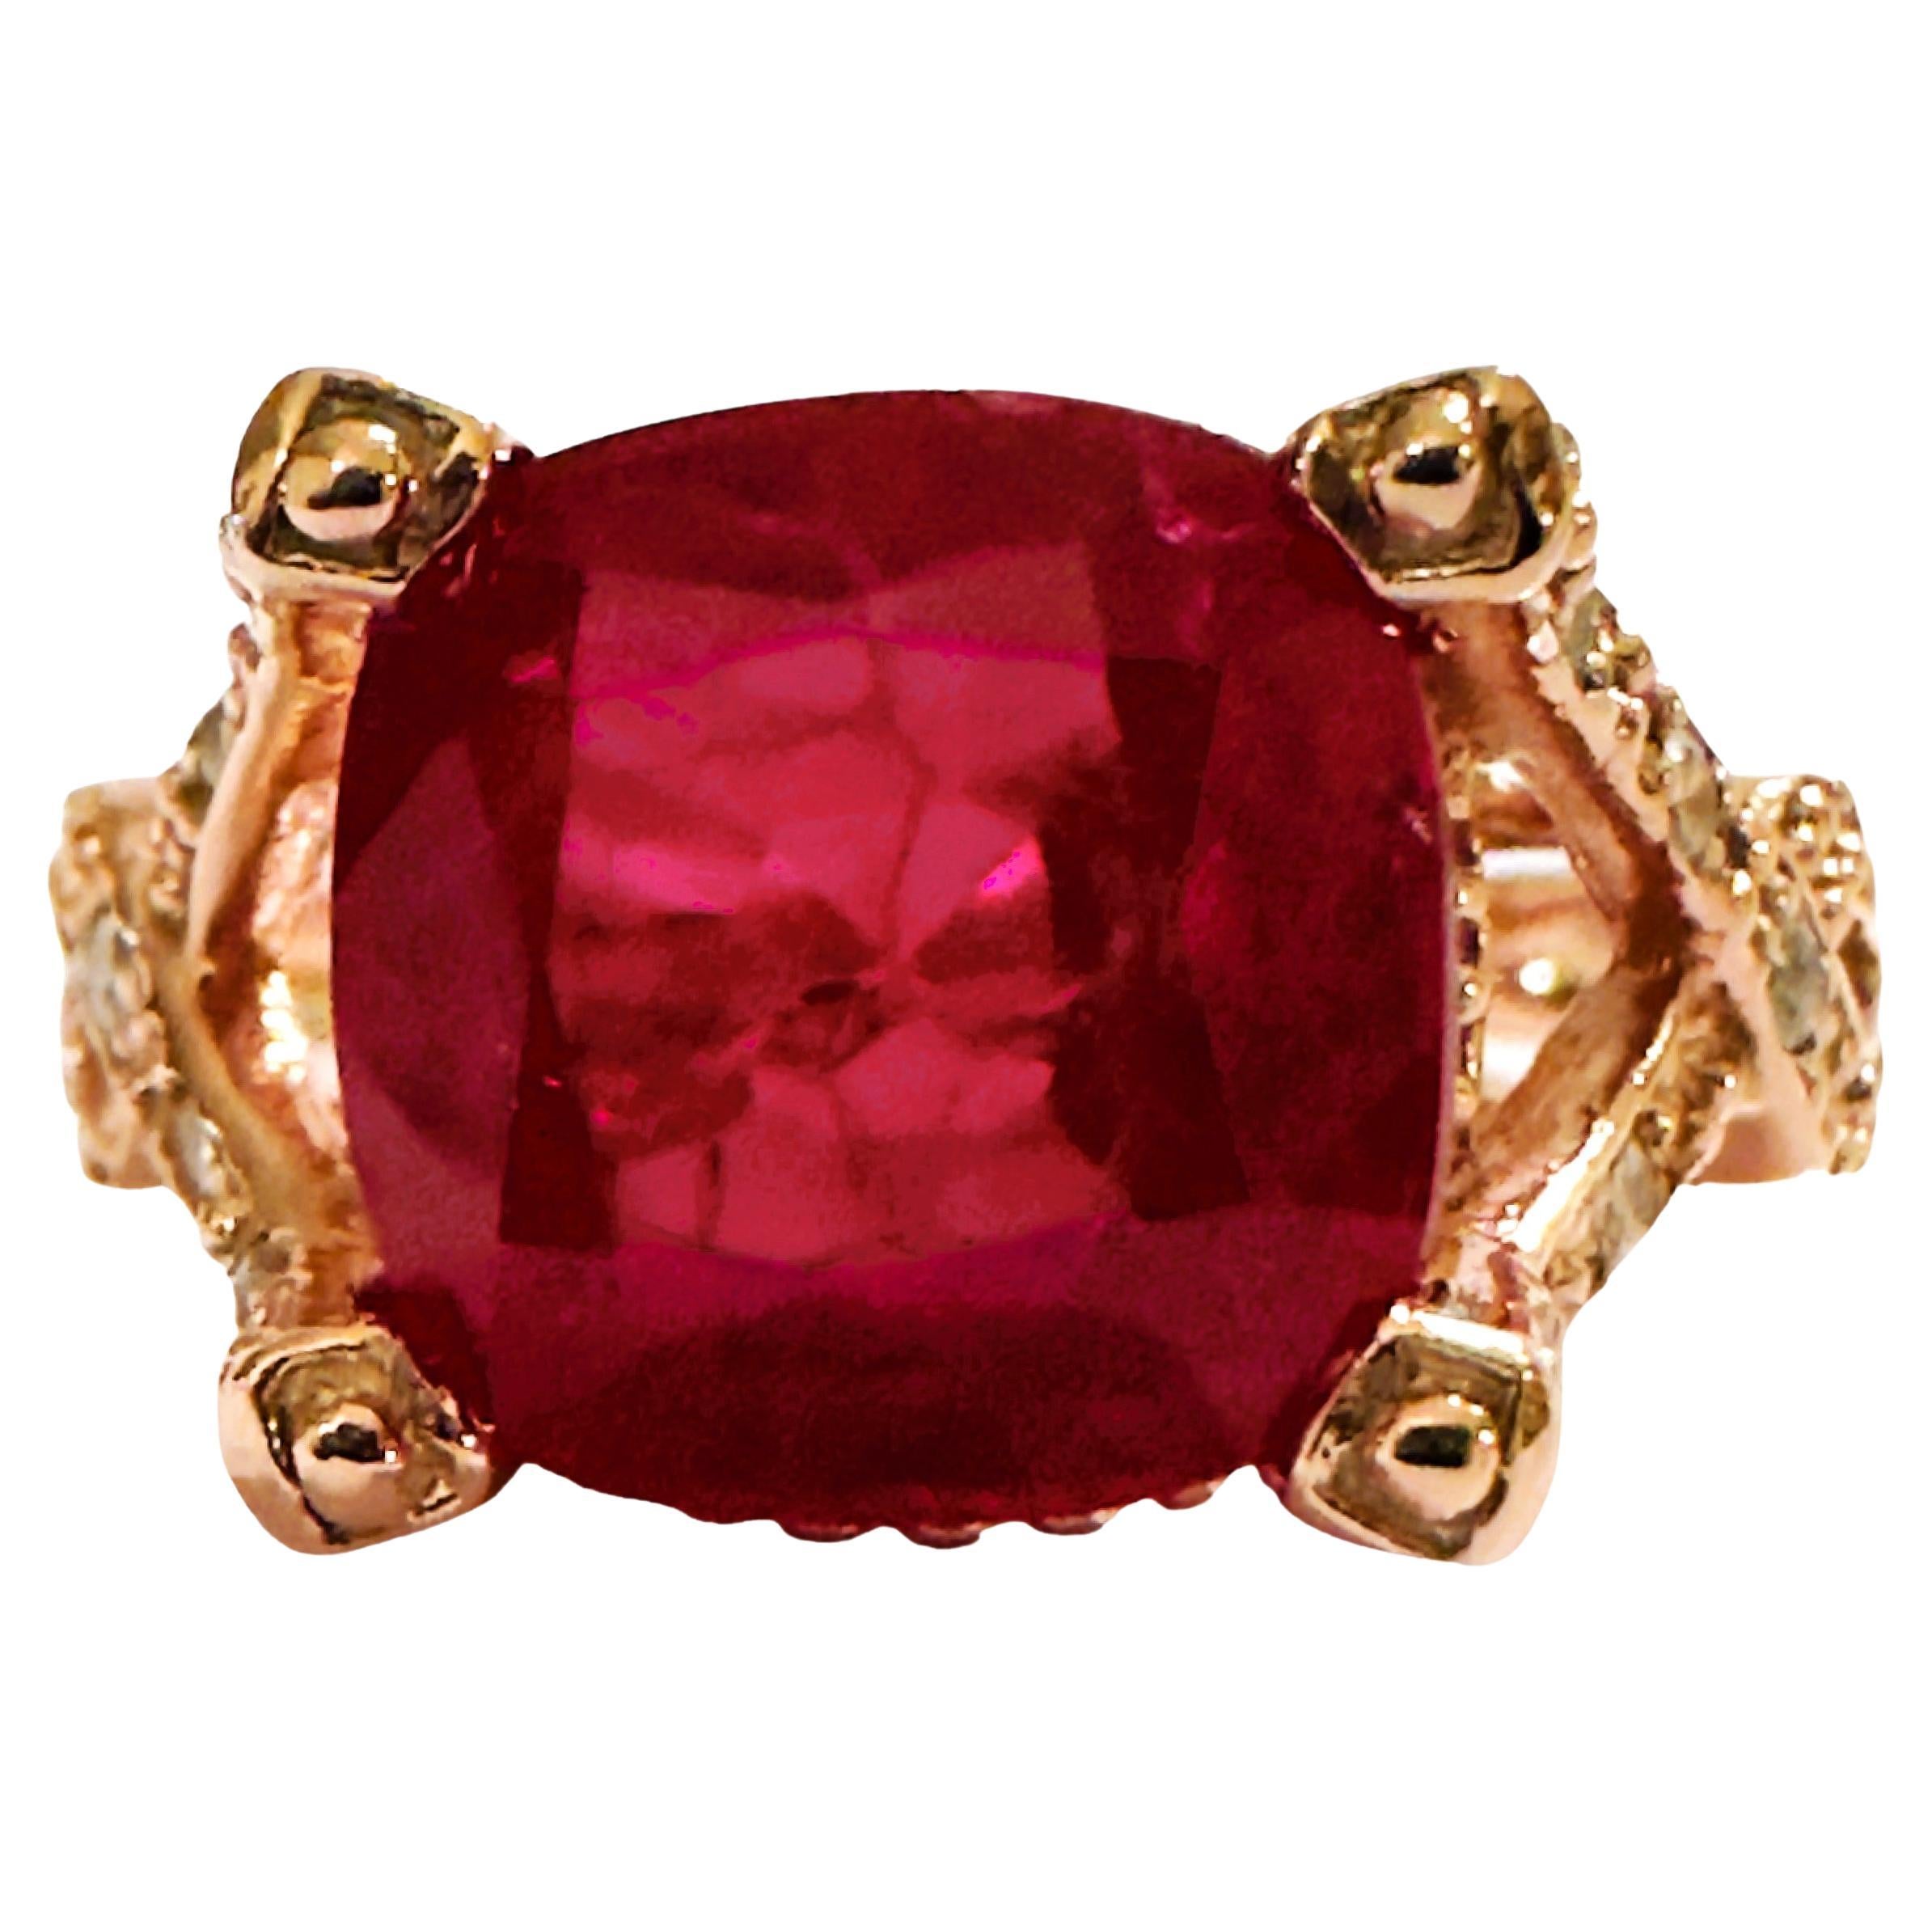 New African 5.4 Ct Pinkish Red Sapphire RGold Plated Sterling Ring  For Sale